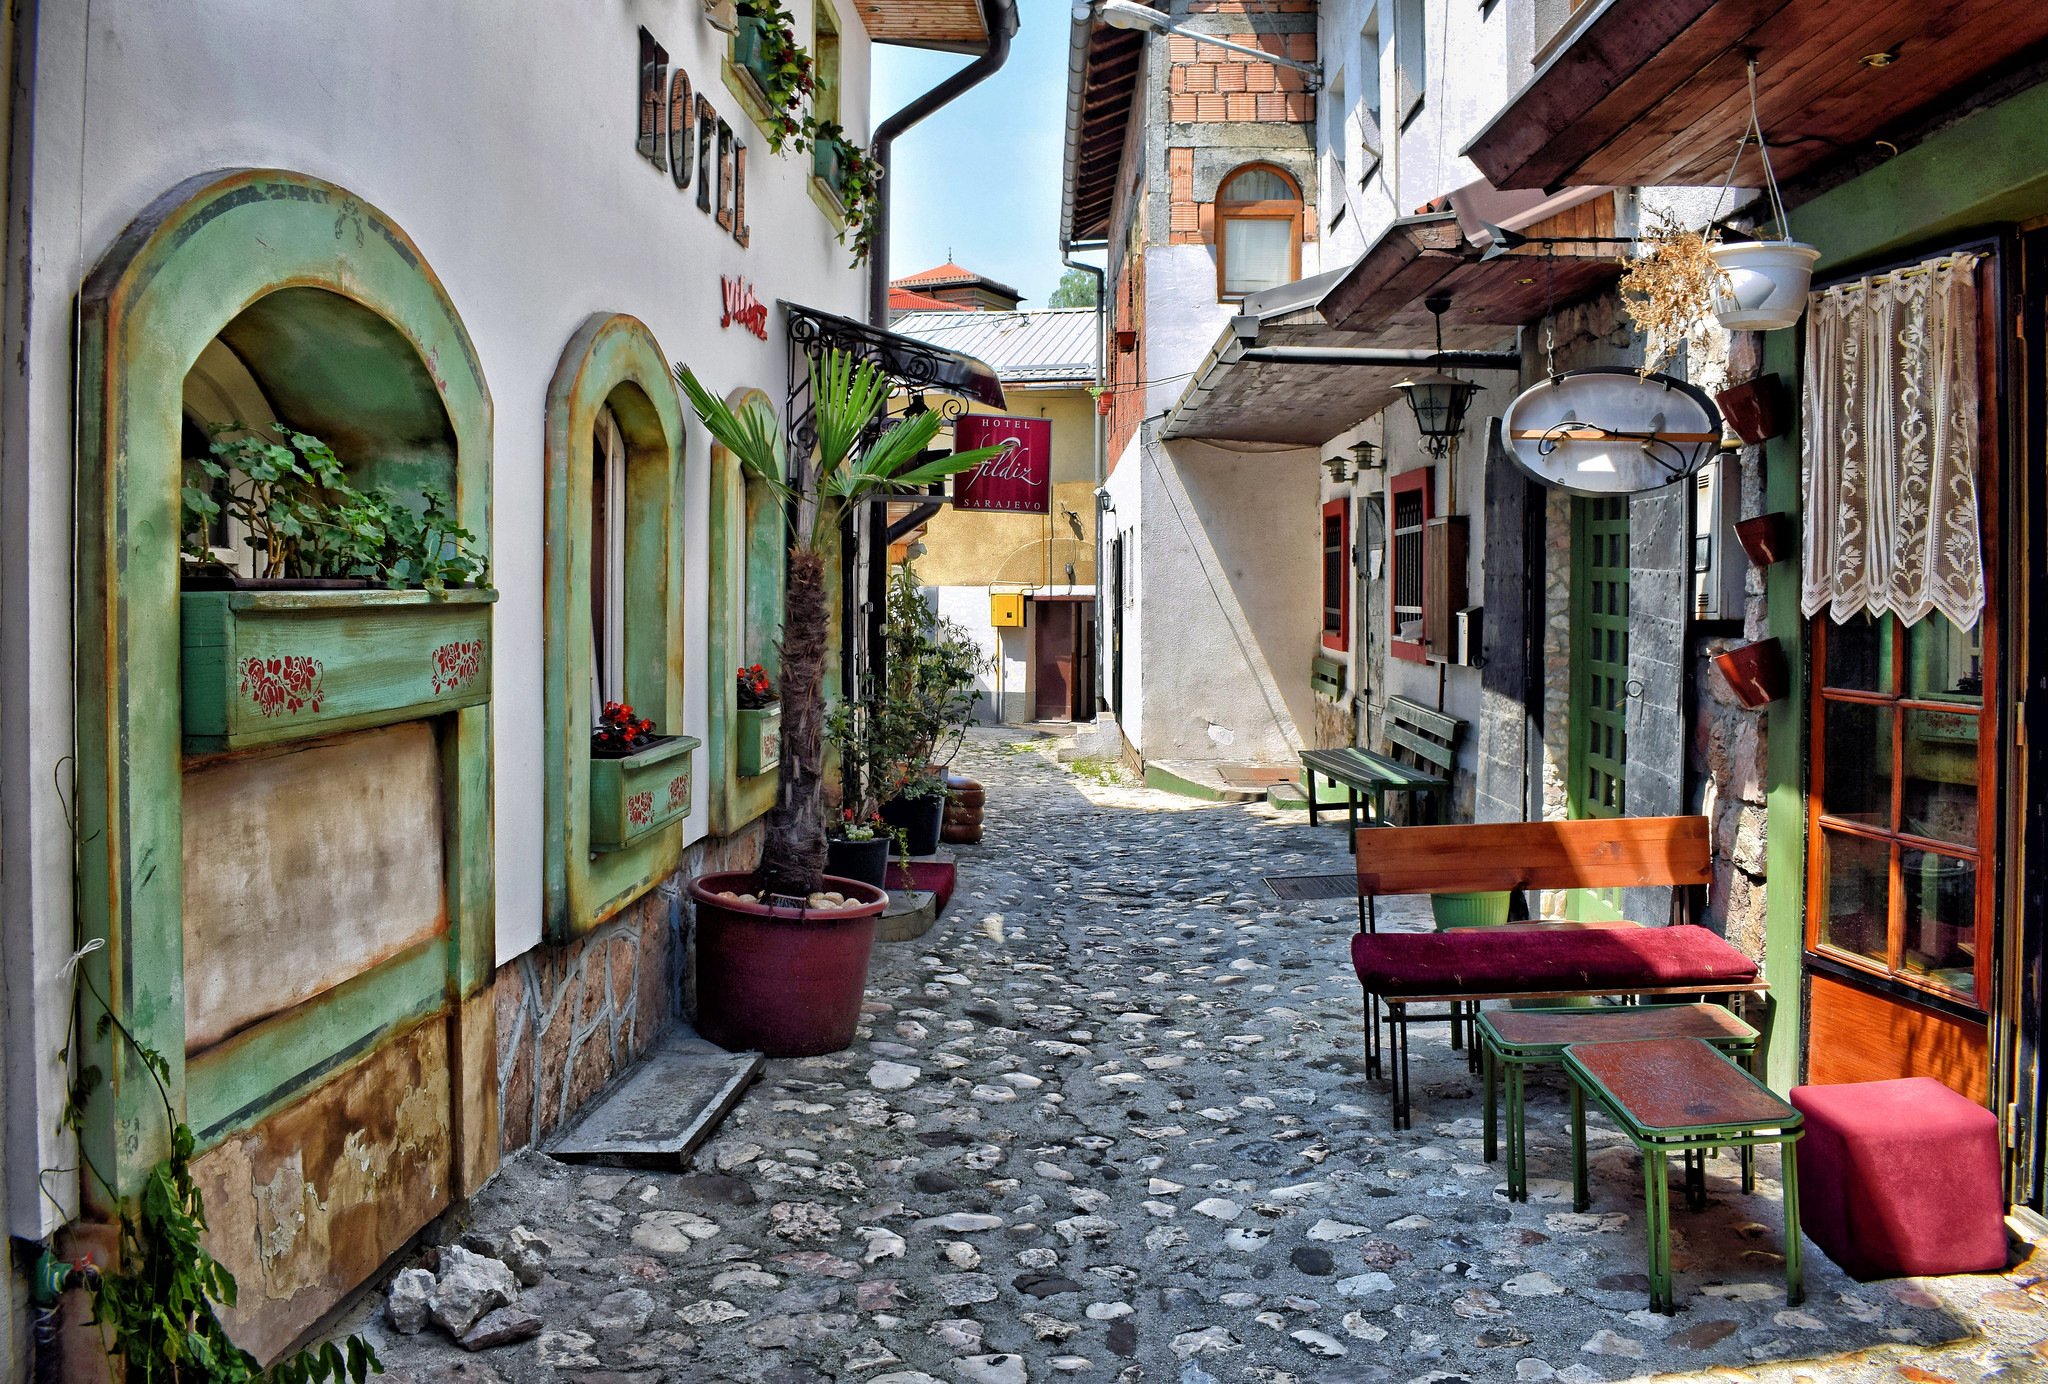 10 Things to Do in Bosnia and Herzegovina